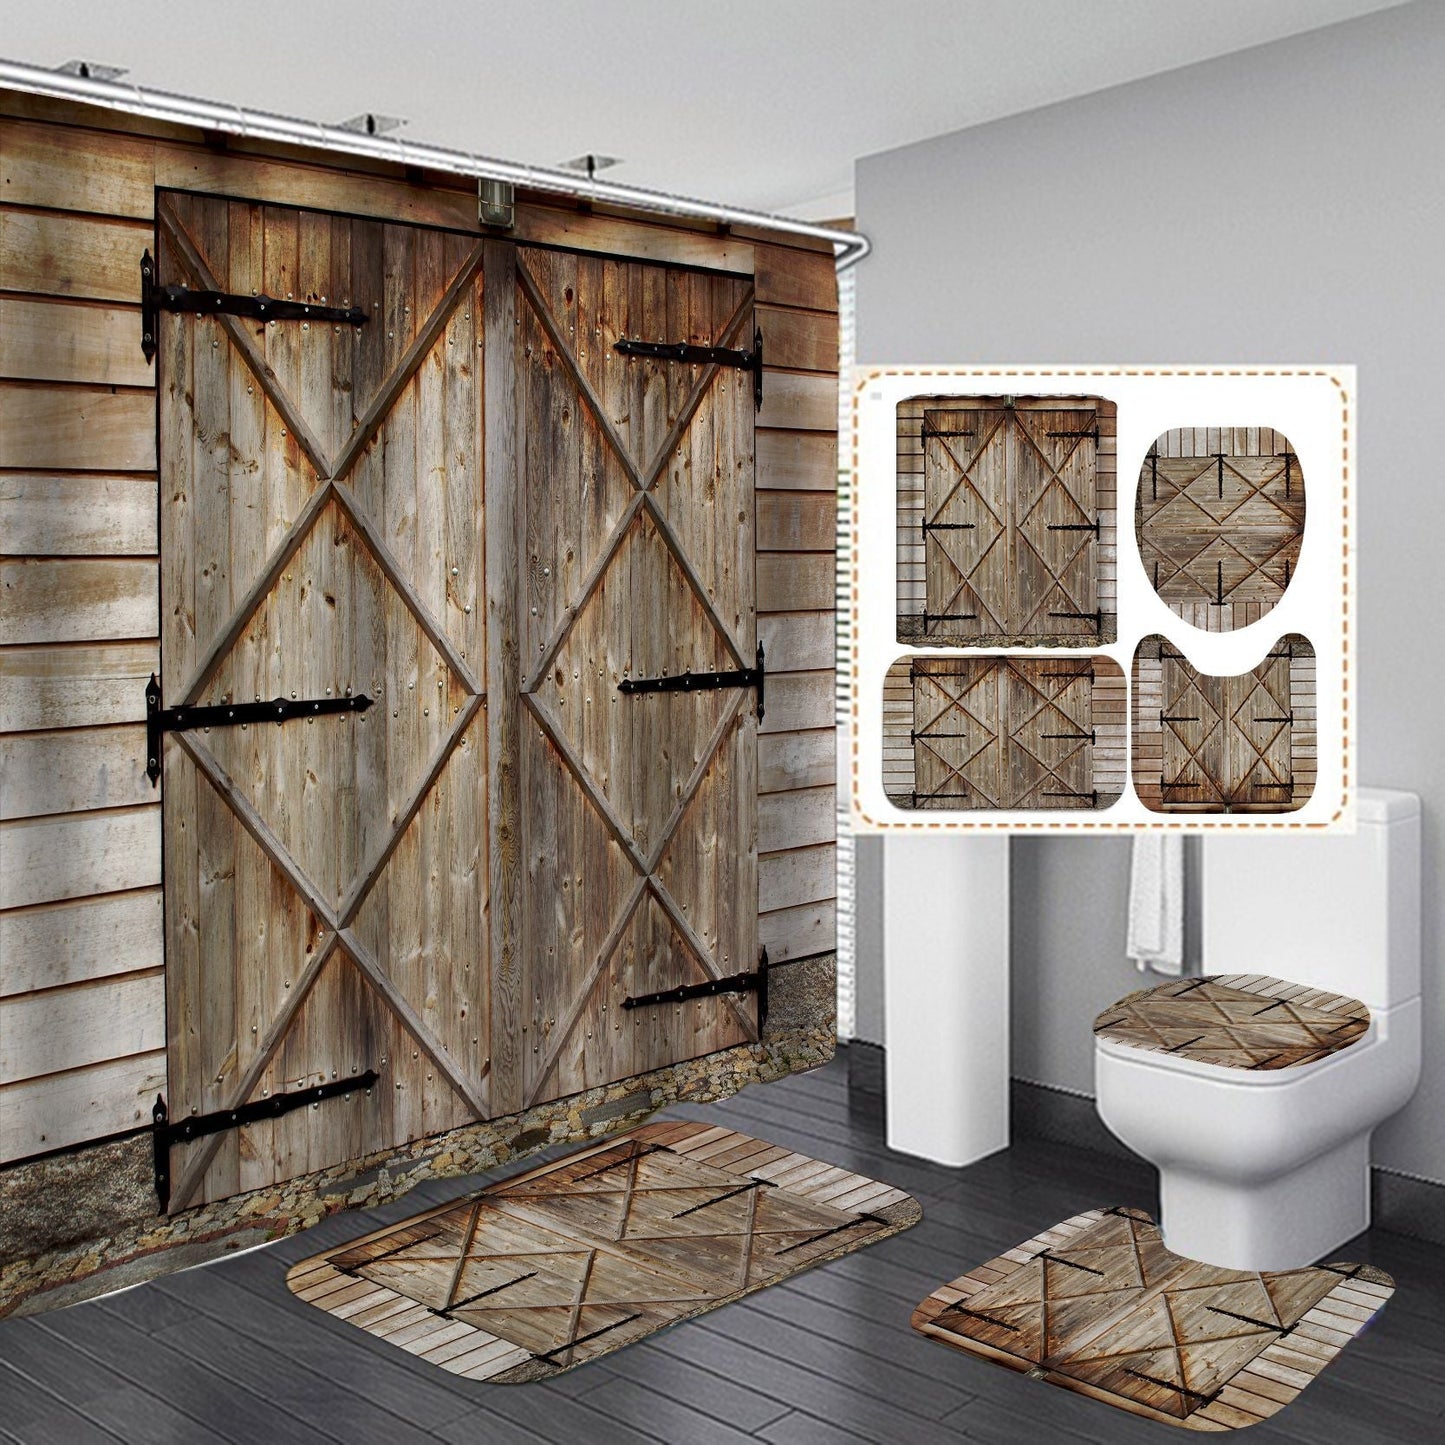 Vintage Wooden Door Design Shower Curtain Bathroom SetsNon-Slip Toilet Lid Cover-Shower Curtain-180×180cm Shower Curtain Only-2-Free Shipping at meselling99